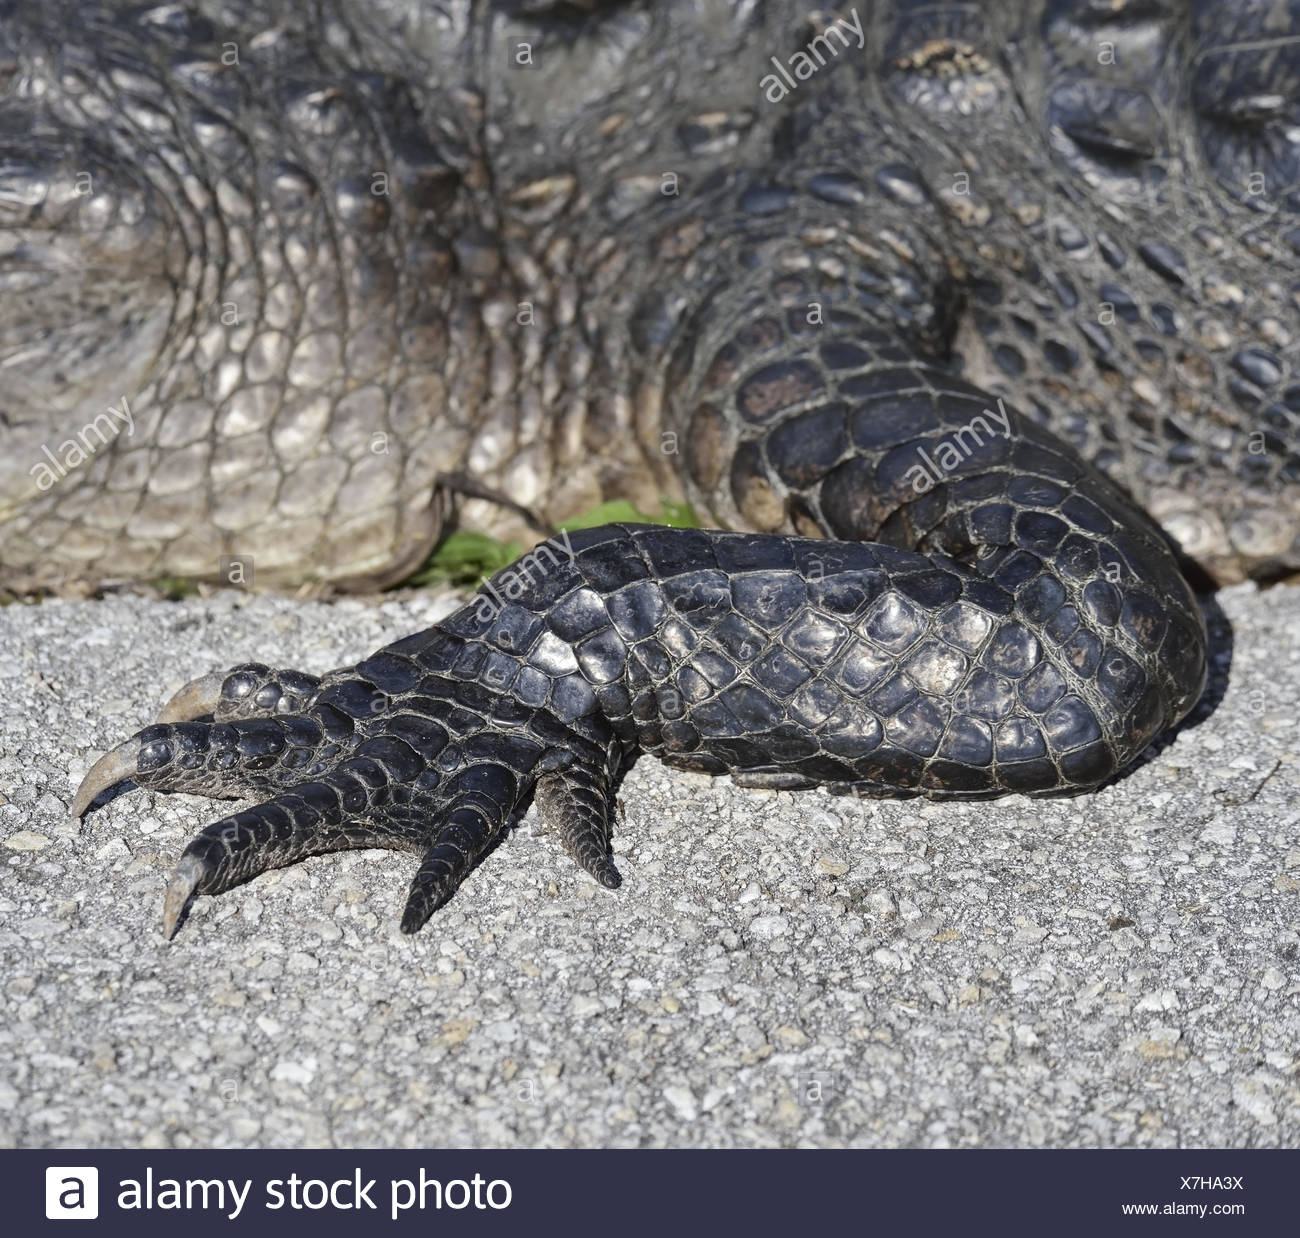 Reptile Claw Stock Photos & Reptile Claw Stock Images - Alamy